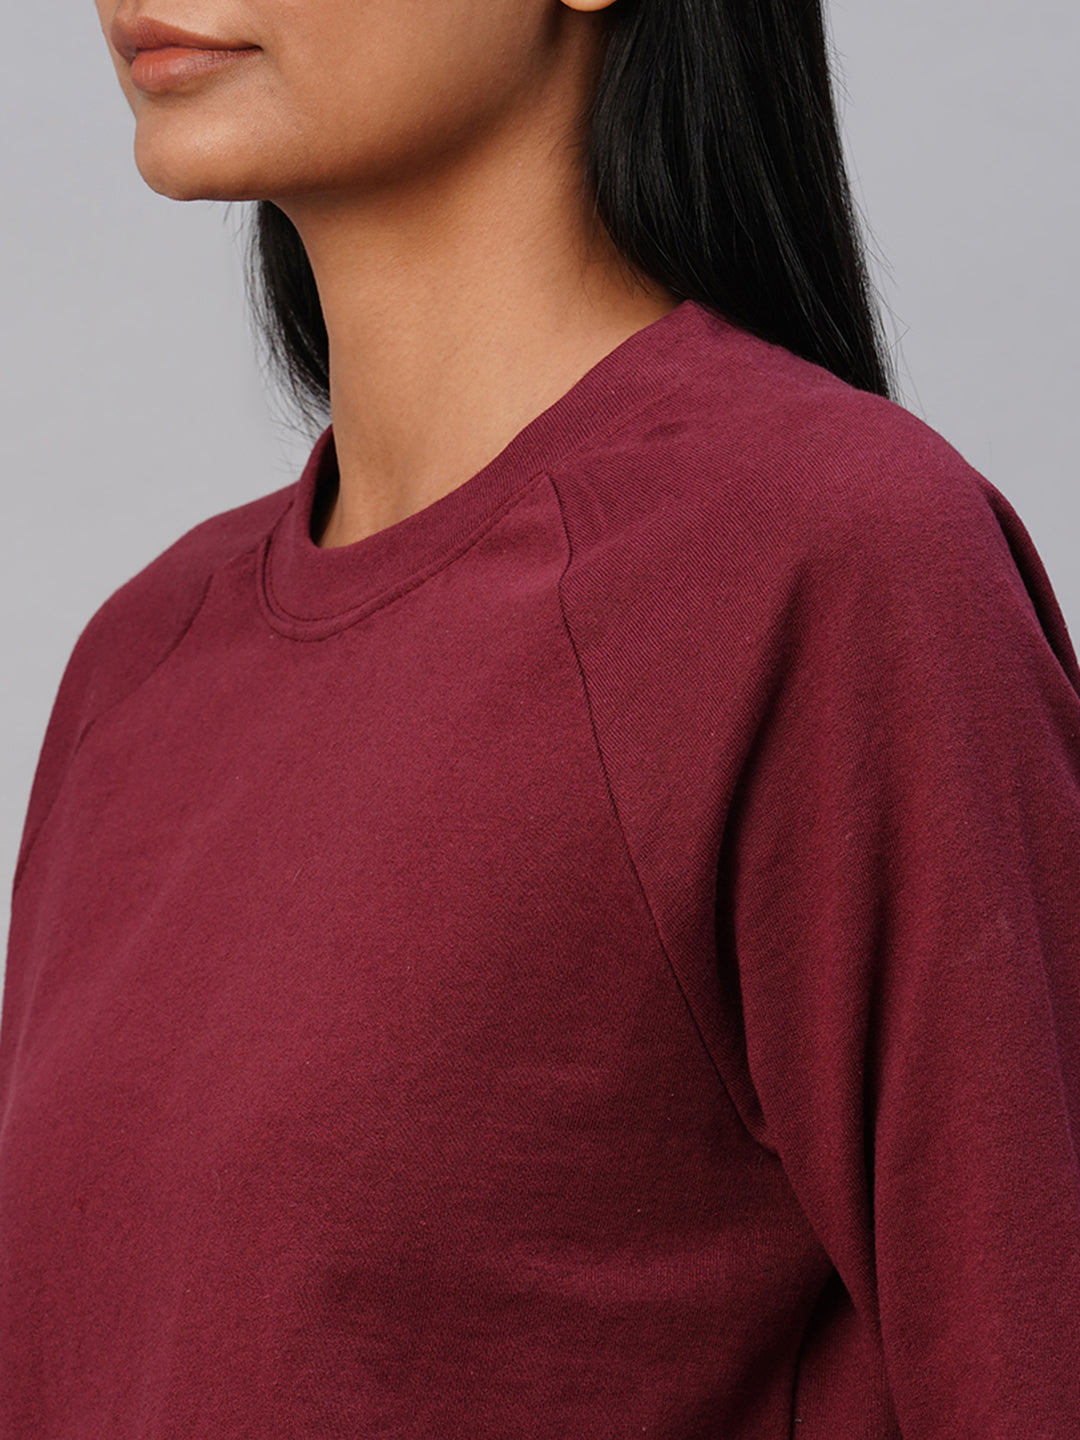 French Terry Sweatshirt With Side Zip Detailing